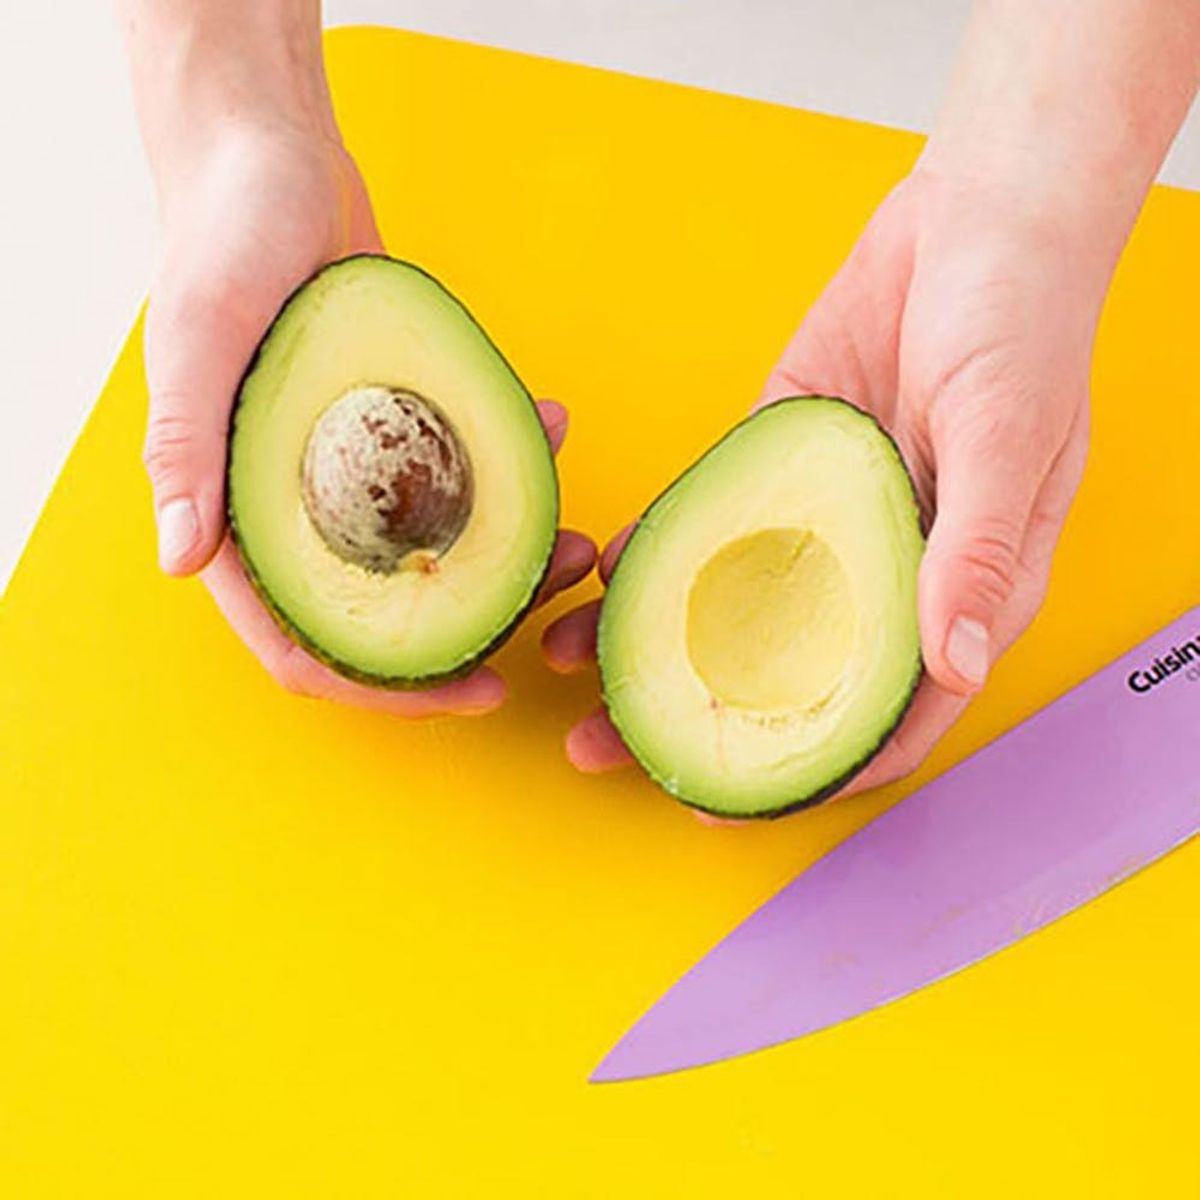 This Totally New Way to Eat Avocados Is Going to Blow Your Mind